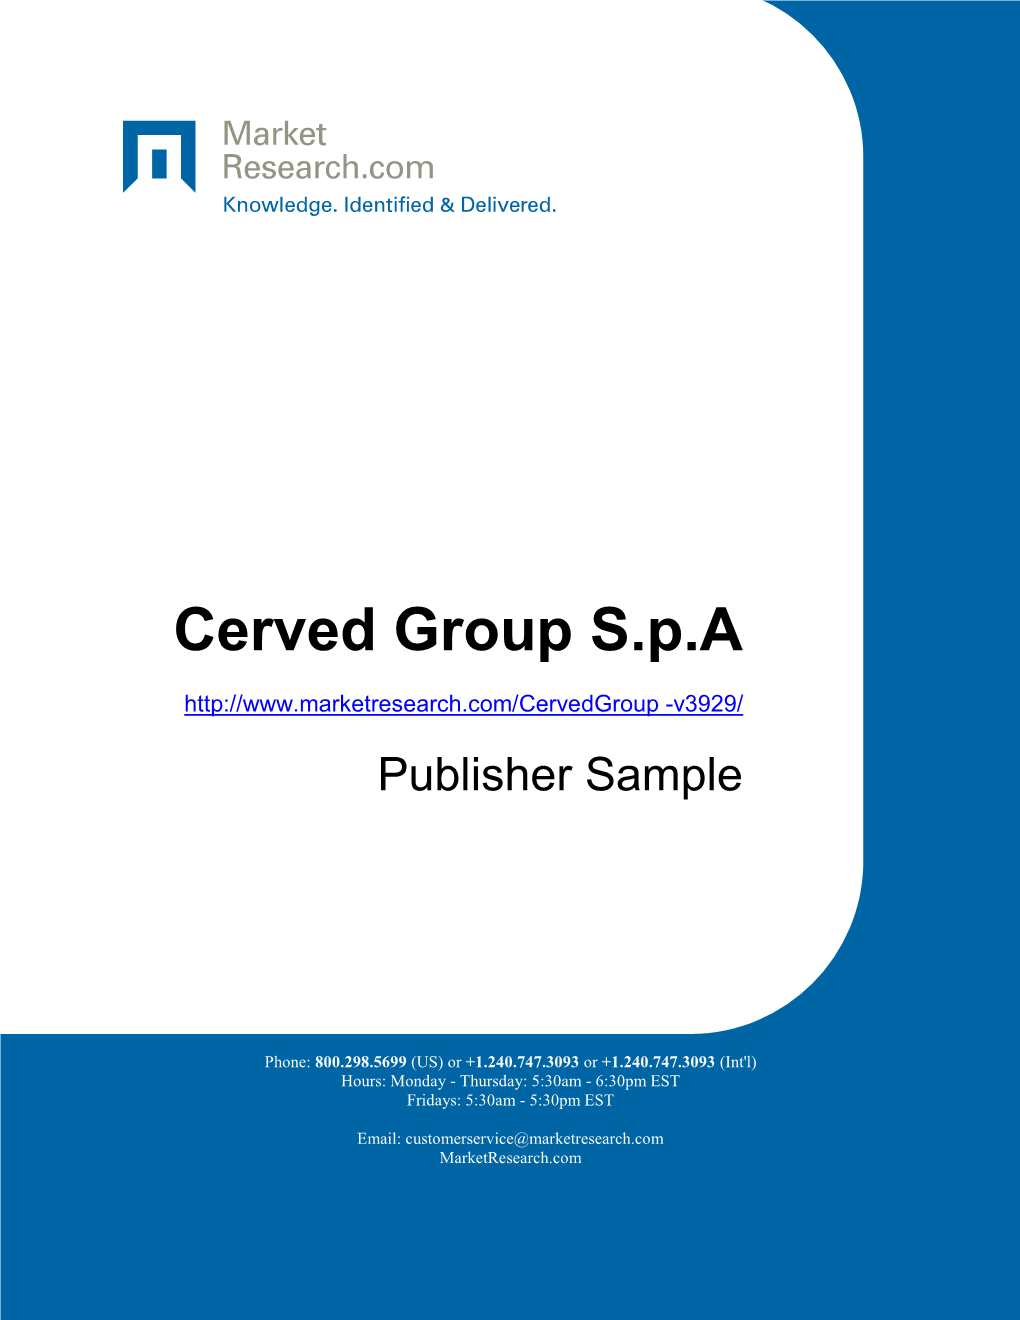 Cerved Group S.P.A